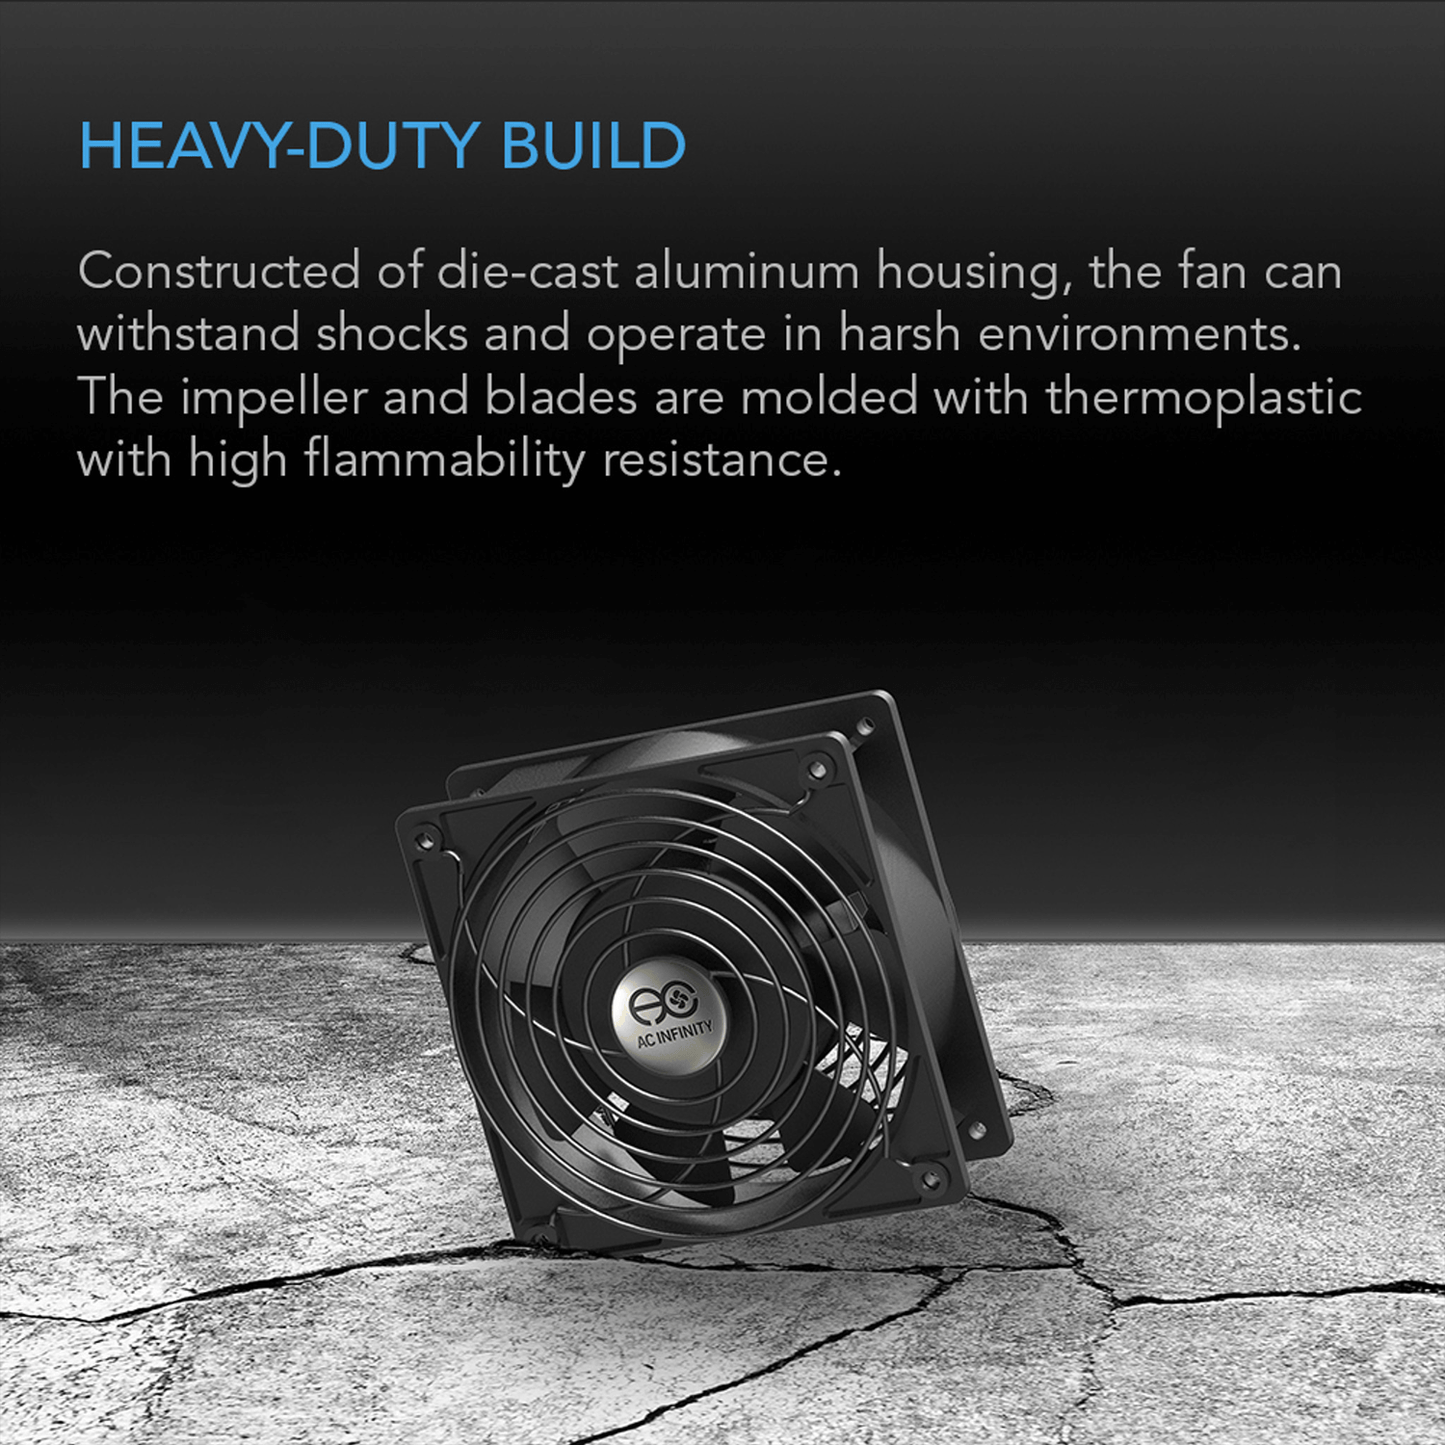 AC Infinity AXIAL 1238, Muffin 120V AC Cooling Fan, 120mm x 120mm x 38mm | HS1238A-X | Grow Tents Depot | Climate Control | 854759004181